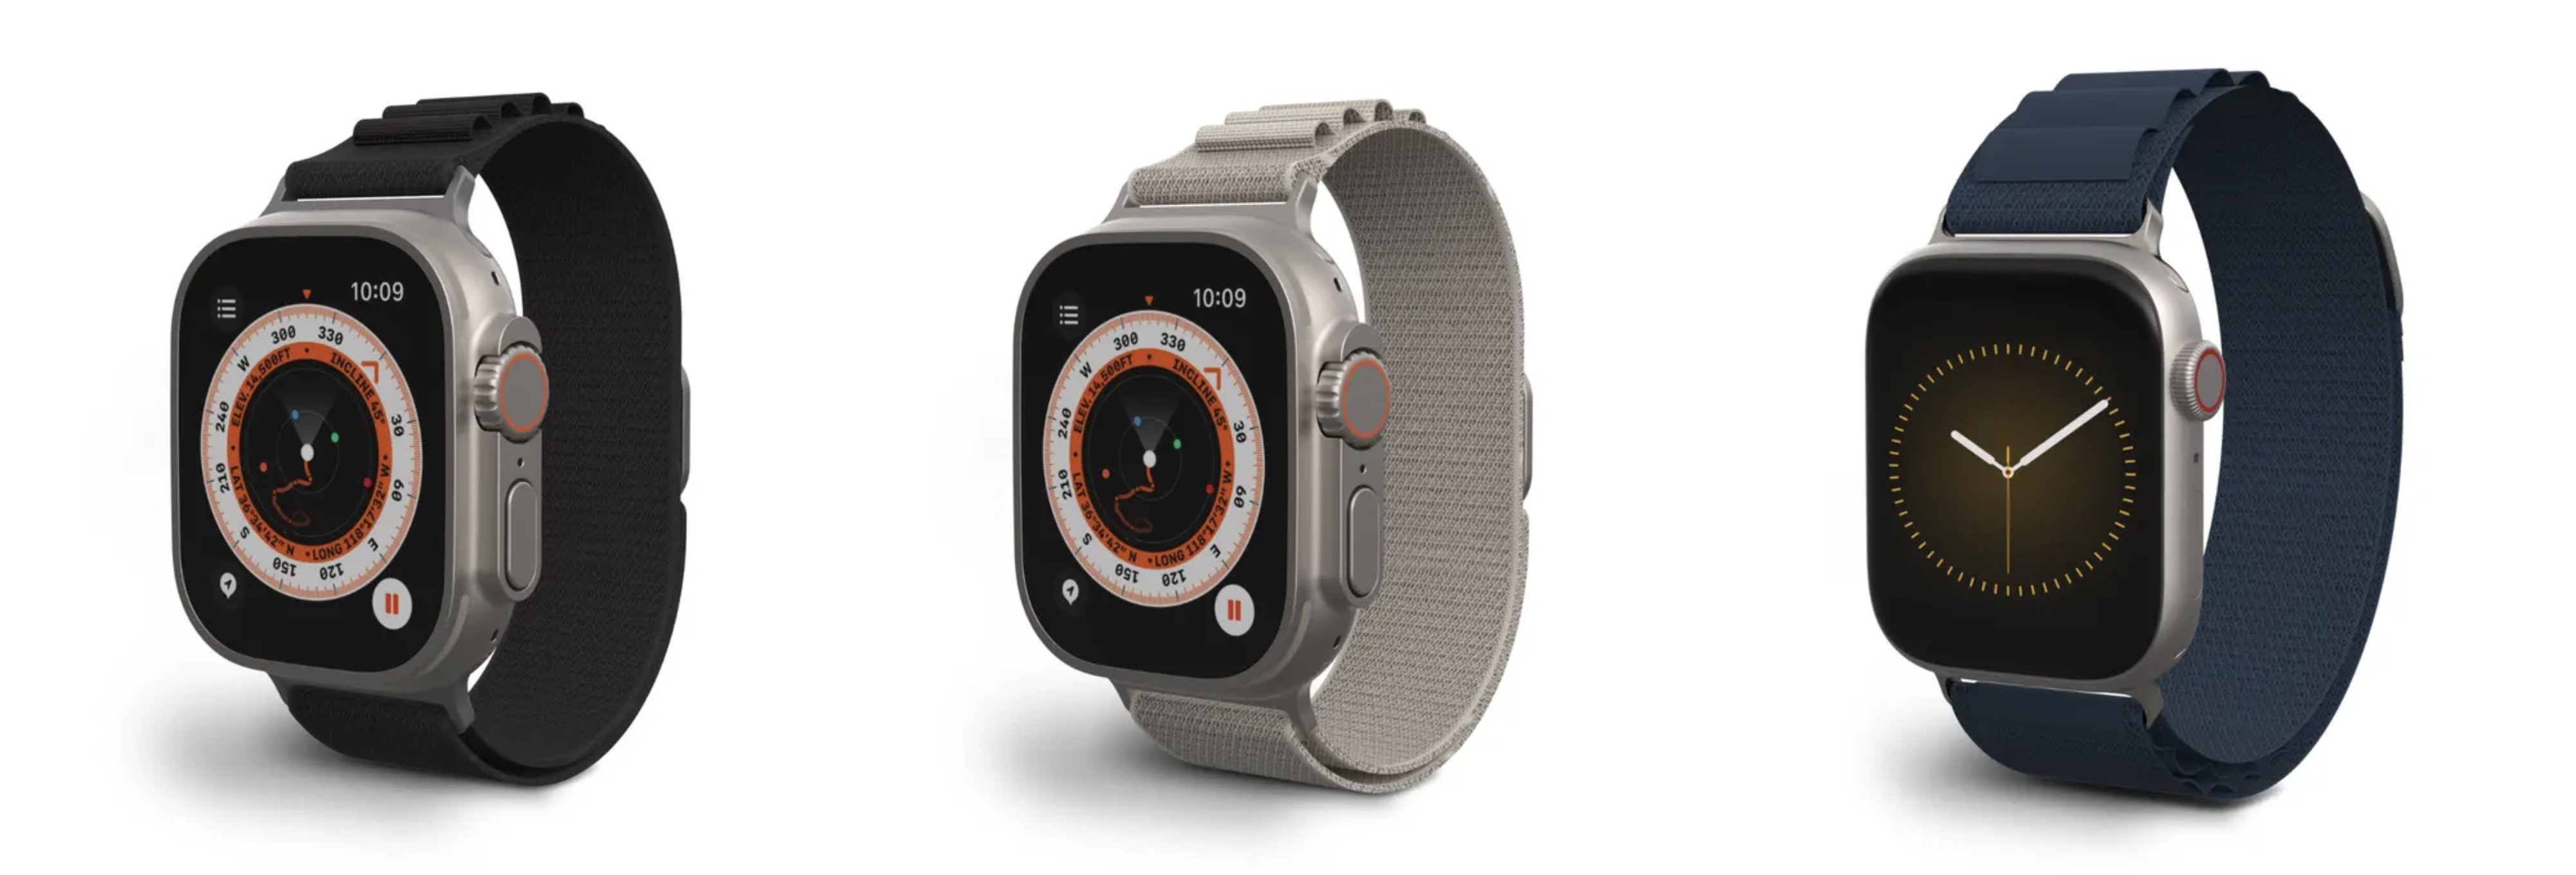 ZAGG’s gear4 brand launches new Alpine Loop-inspired Highland Apple Watch straps